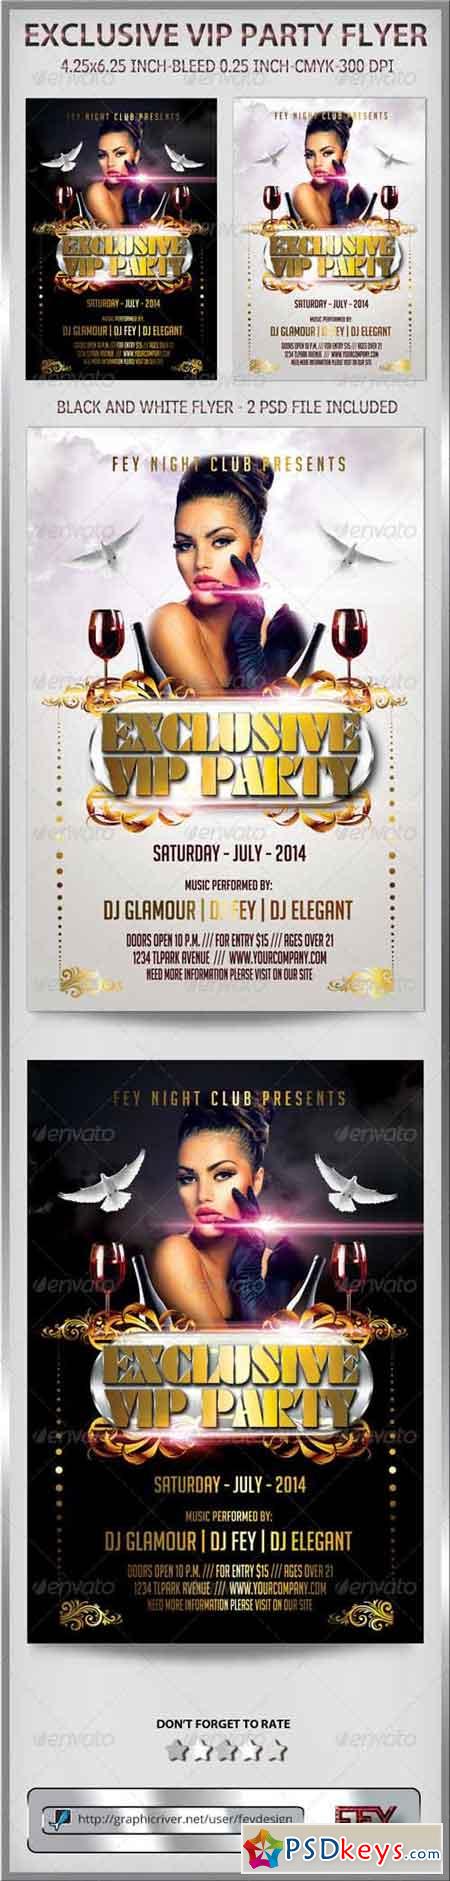 Exclusive VIP Party Flyer 8275134